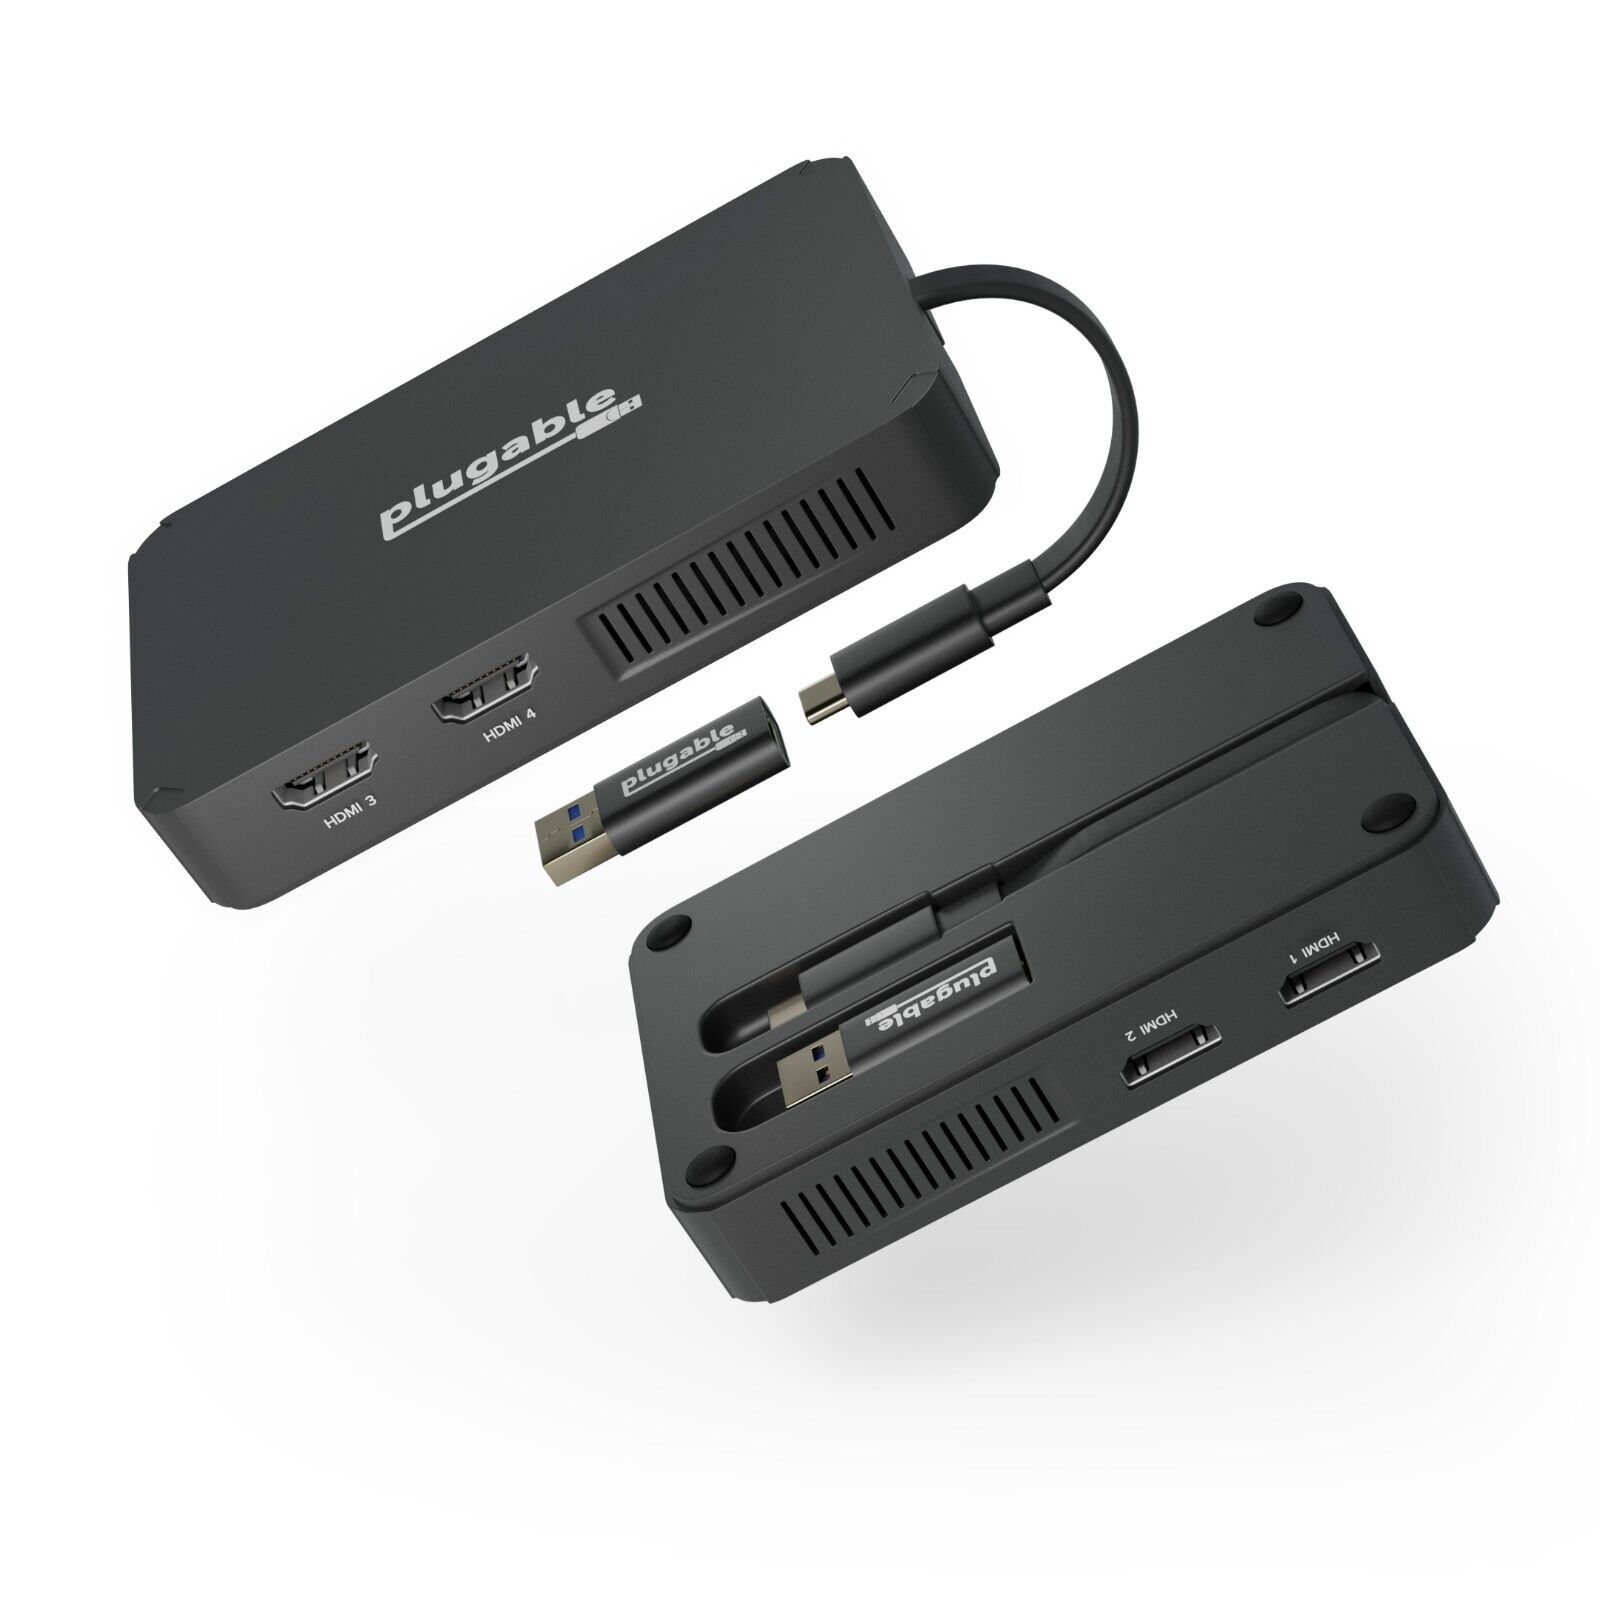 Plugable 4x HDMI Multi Monitor Adapter, USB 3.0 or USB C to HDMI Adapter